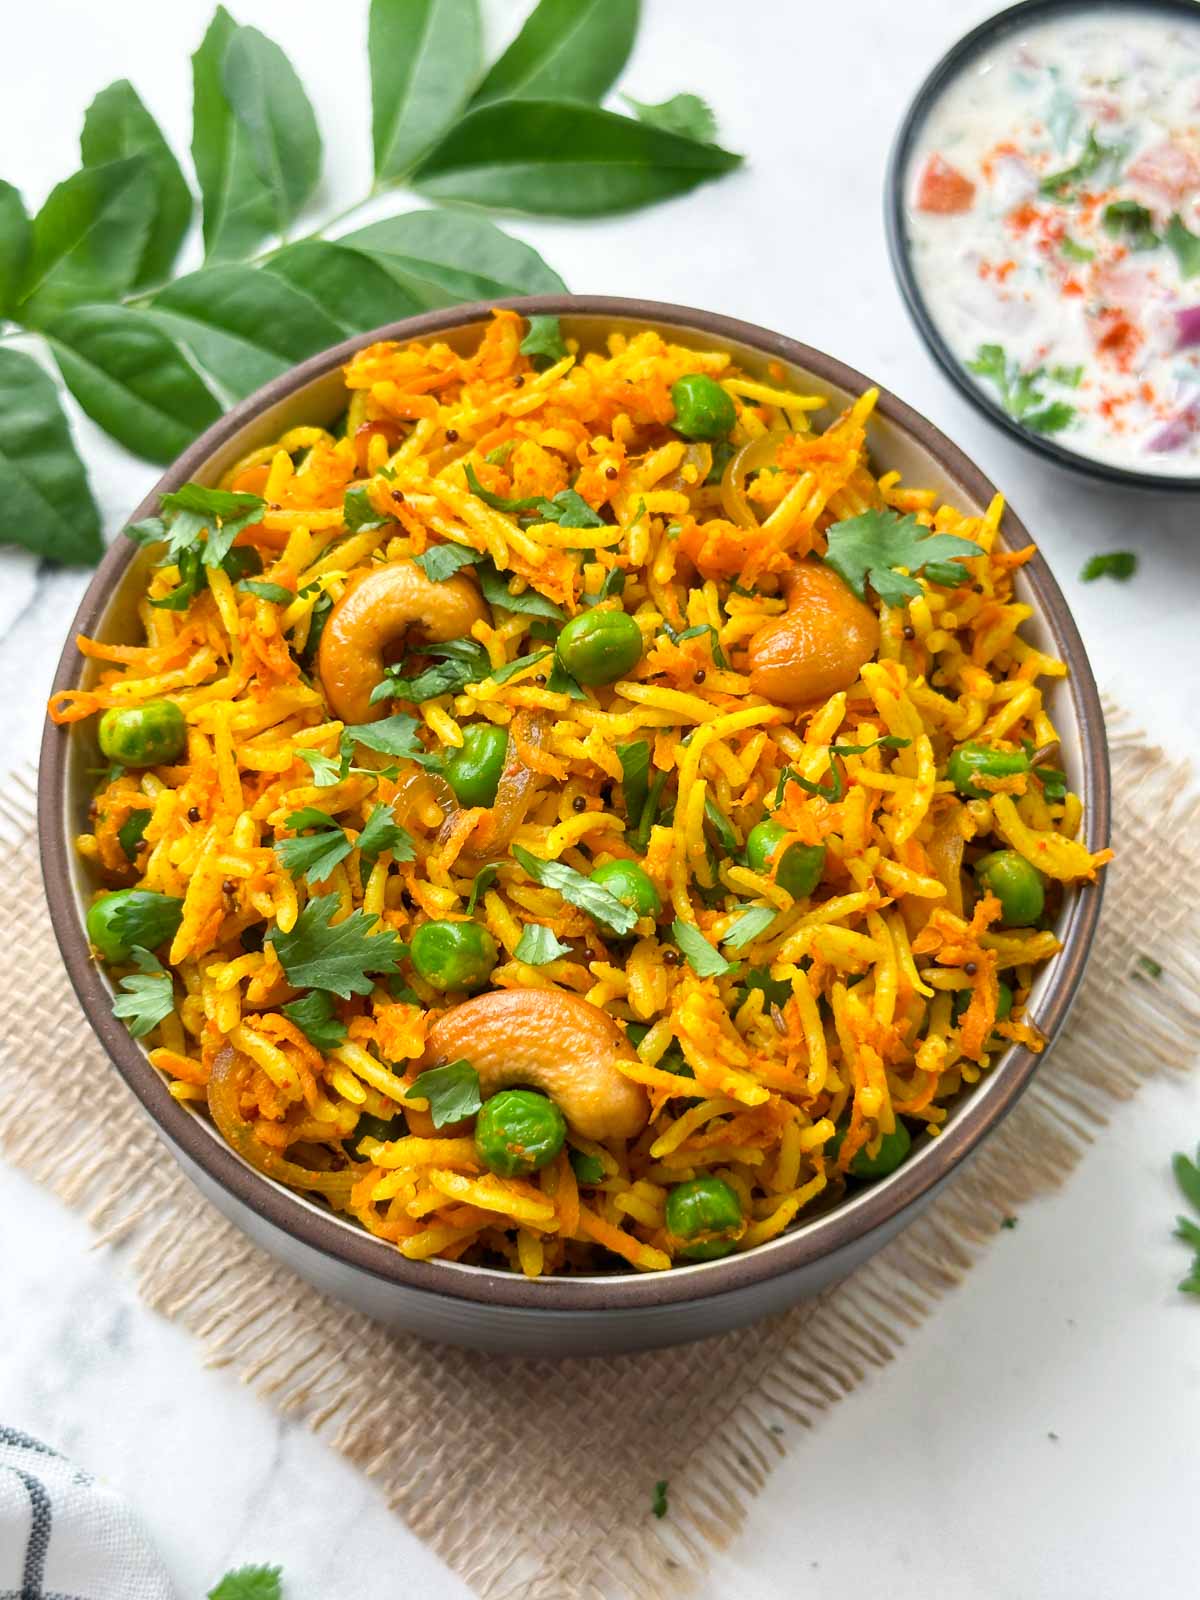 Indian carrot pulao served in a bowl with raita on the side along with spices and curry leaves